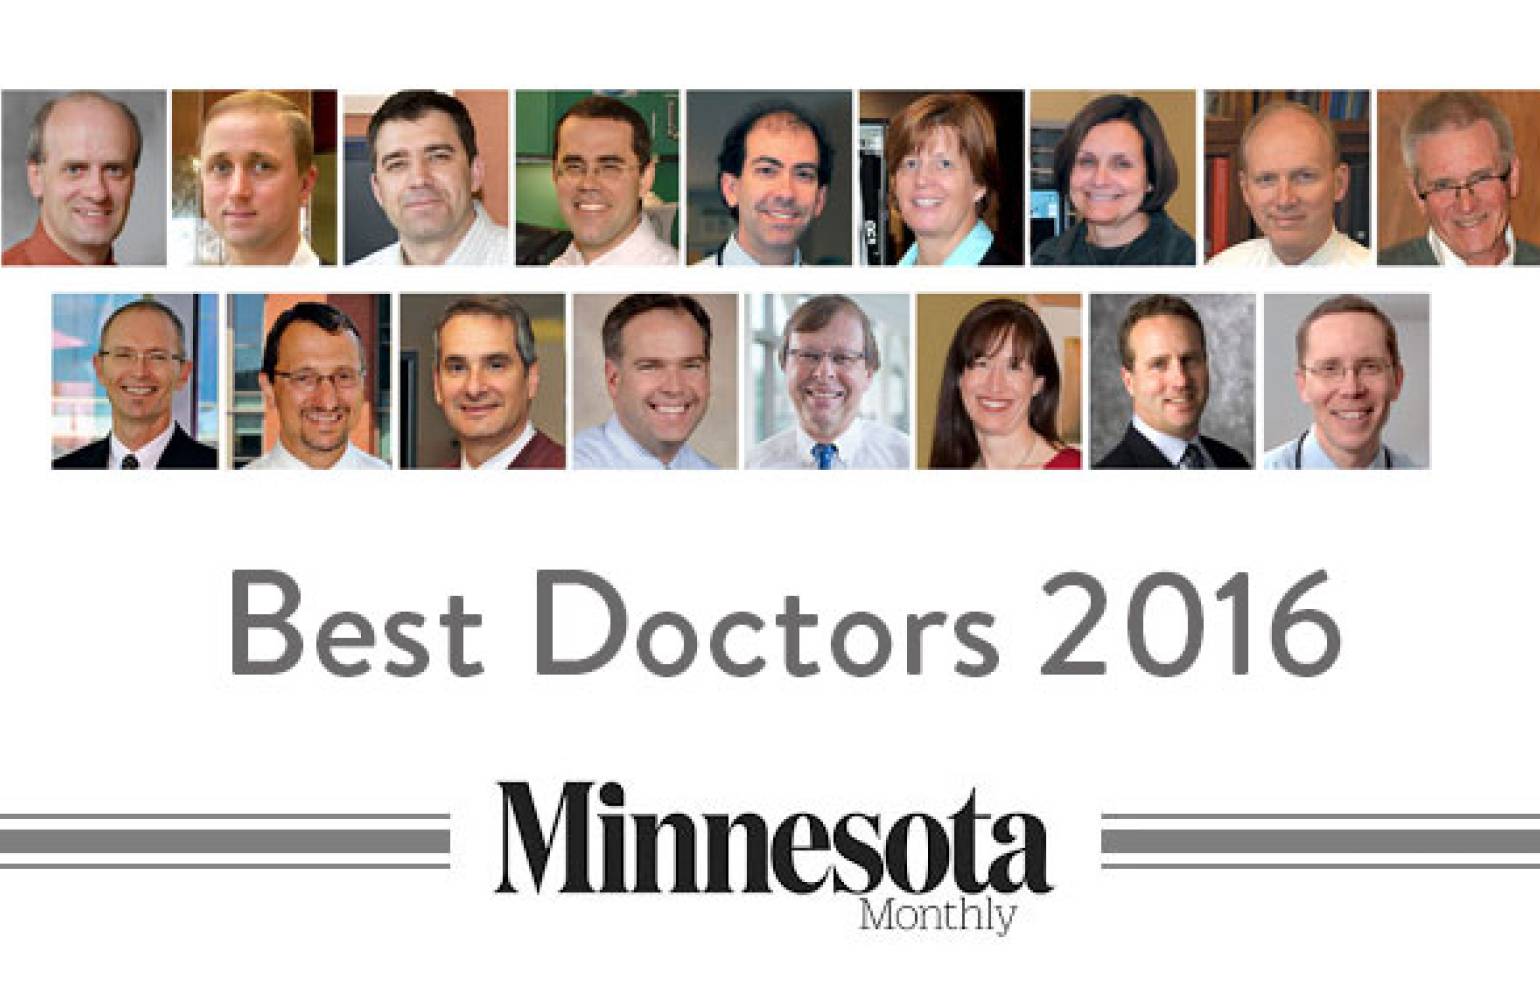 Gillette Children’s Specialty Healthcare is honored that 17 of our physicians are on Minnesota Monthly Magazine’s 2016 “Best Doctors” list.